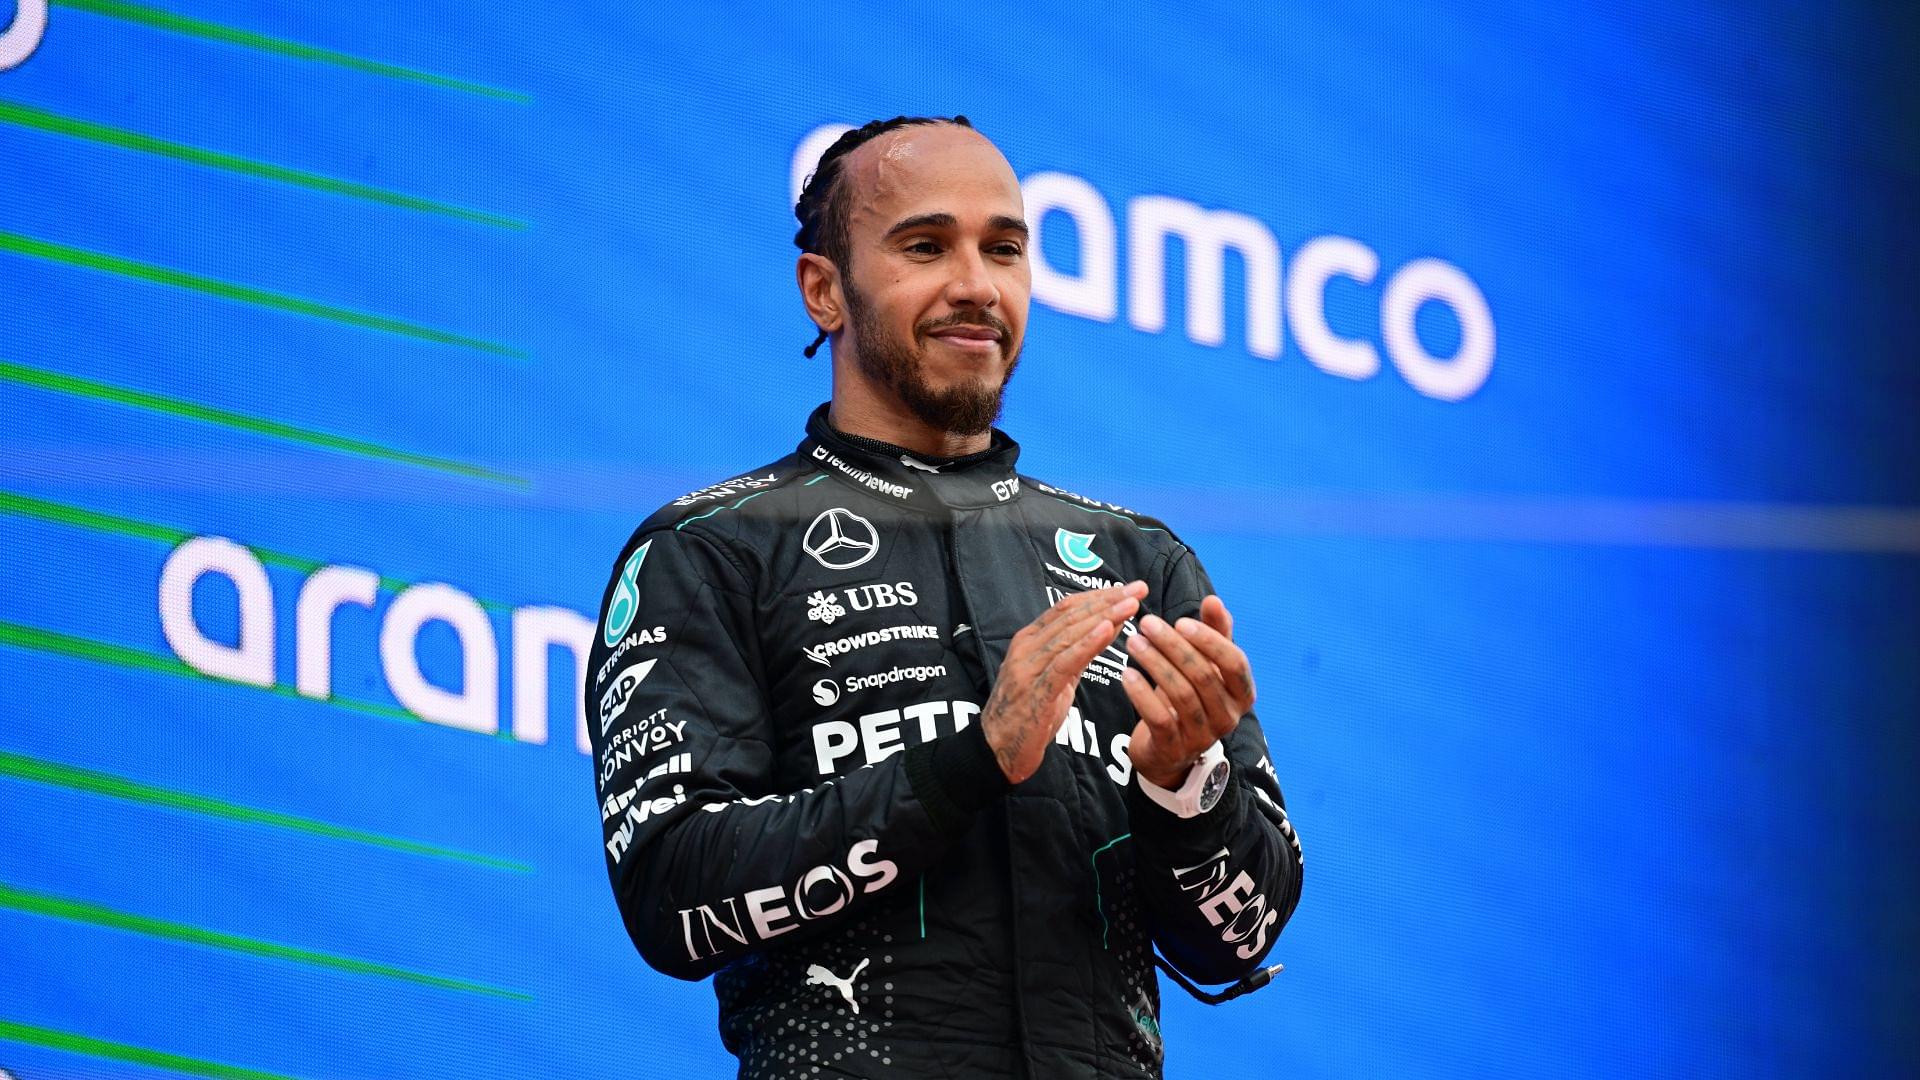 Lewis Hamilton Explains What Kept Him From Challenging Max Verstappen and Lando Norris